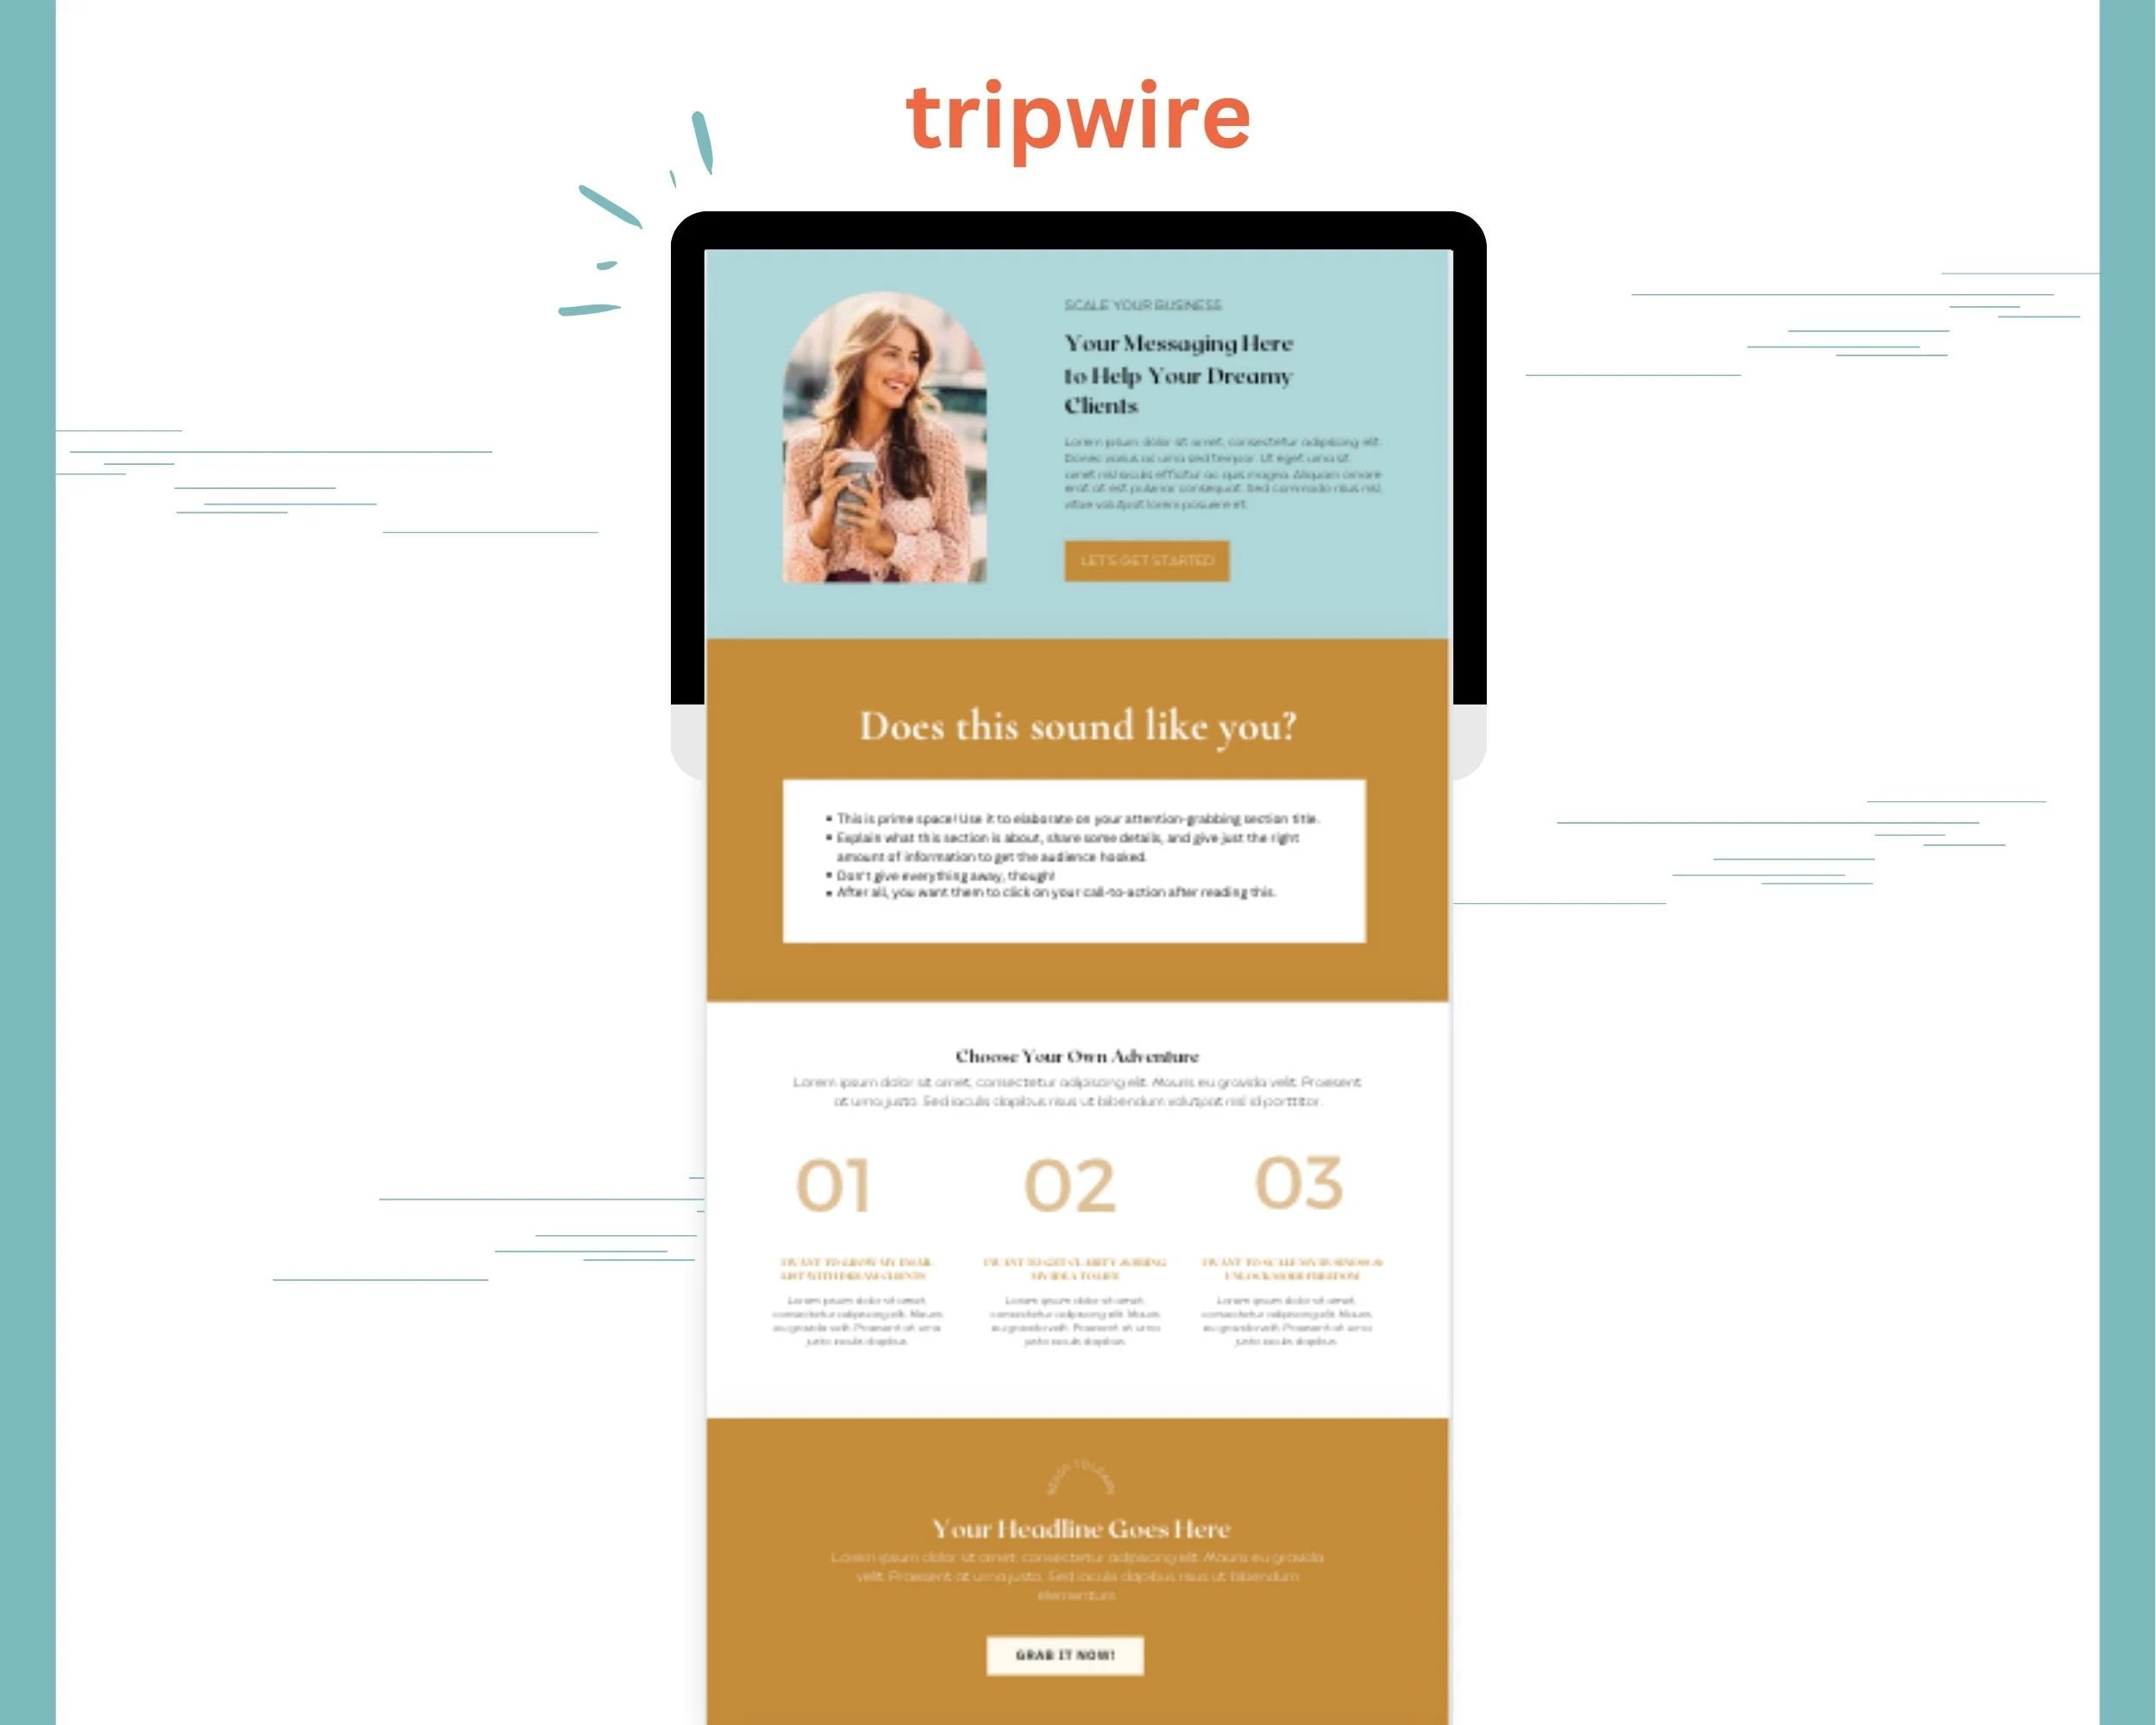 Green and Gold 2-Step Tripwire Sales Funnel in Canva